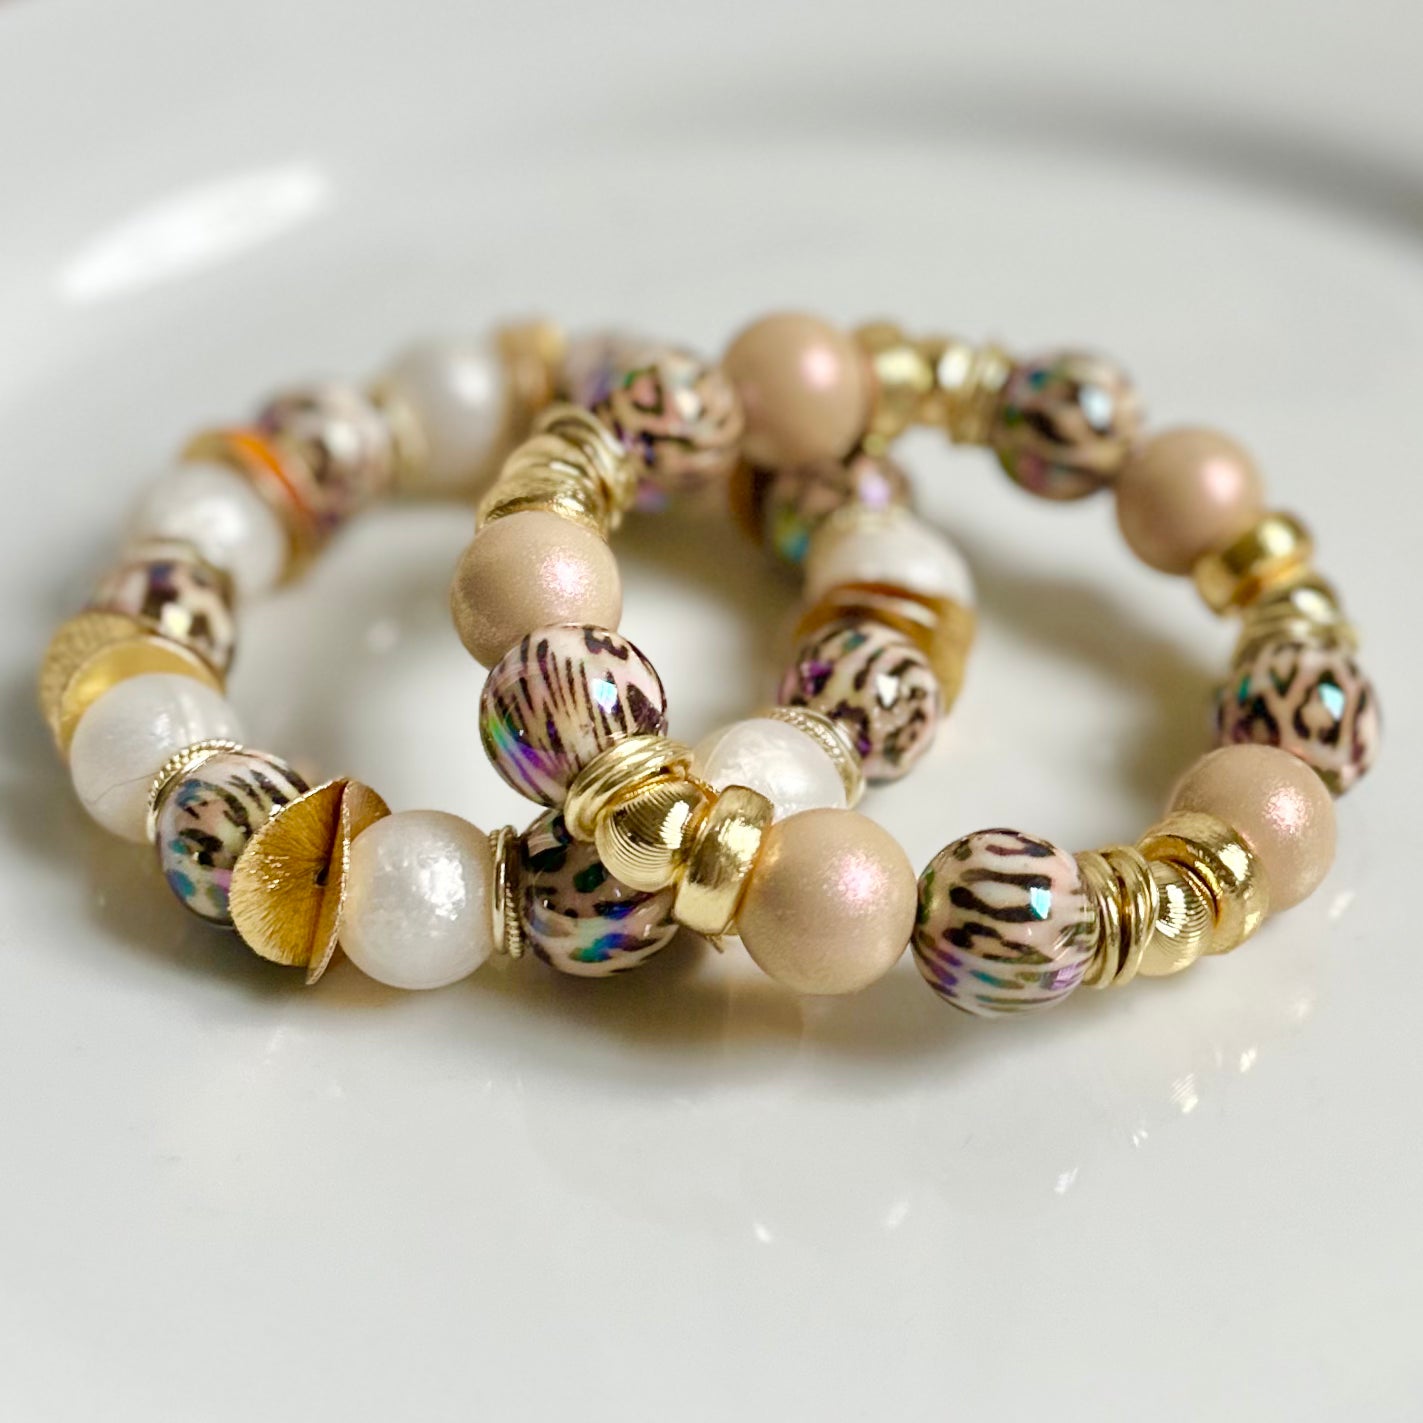 GOLD WAVY DISC, SHINY CHEETAH AND PEARLIZED IVORY STATEMENT BRACELET